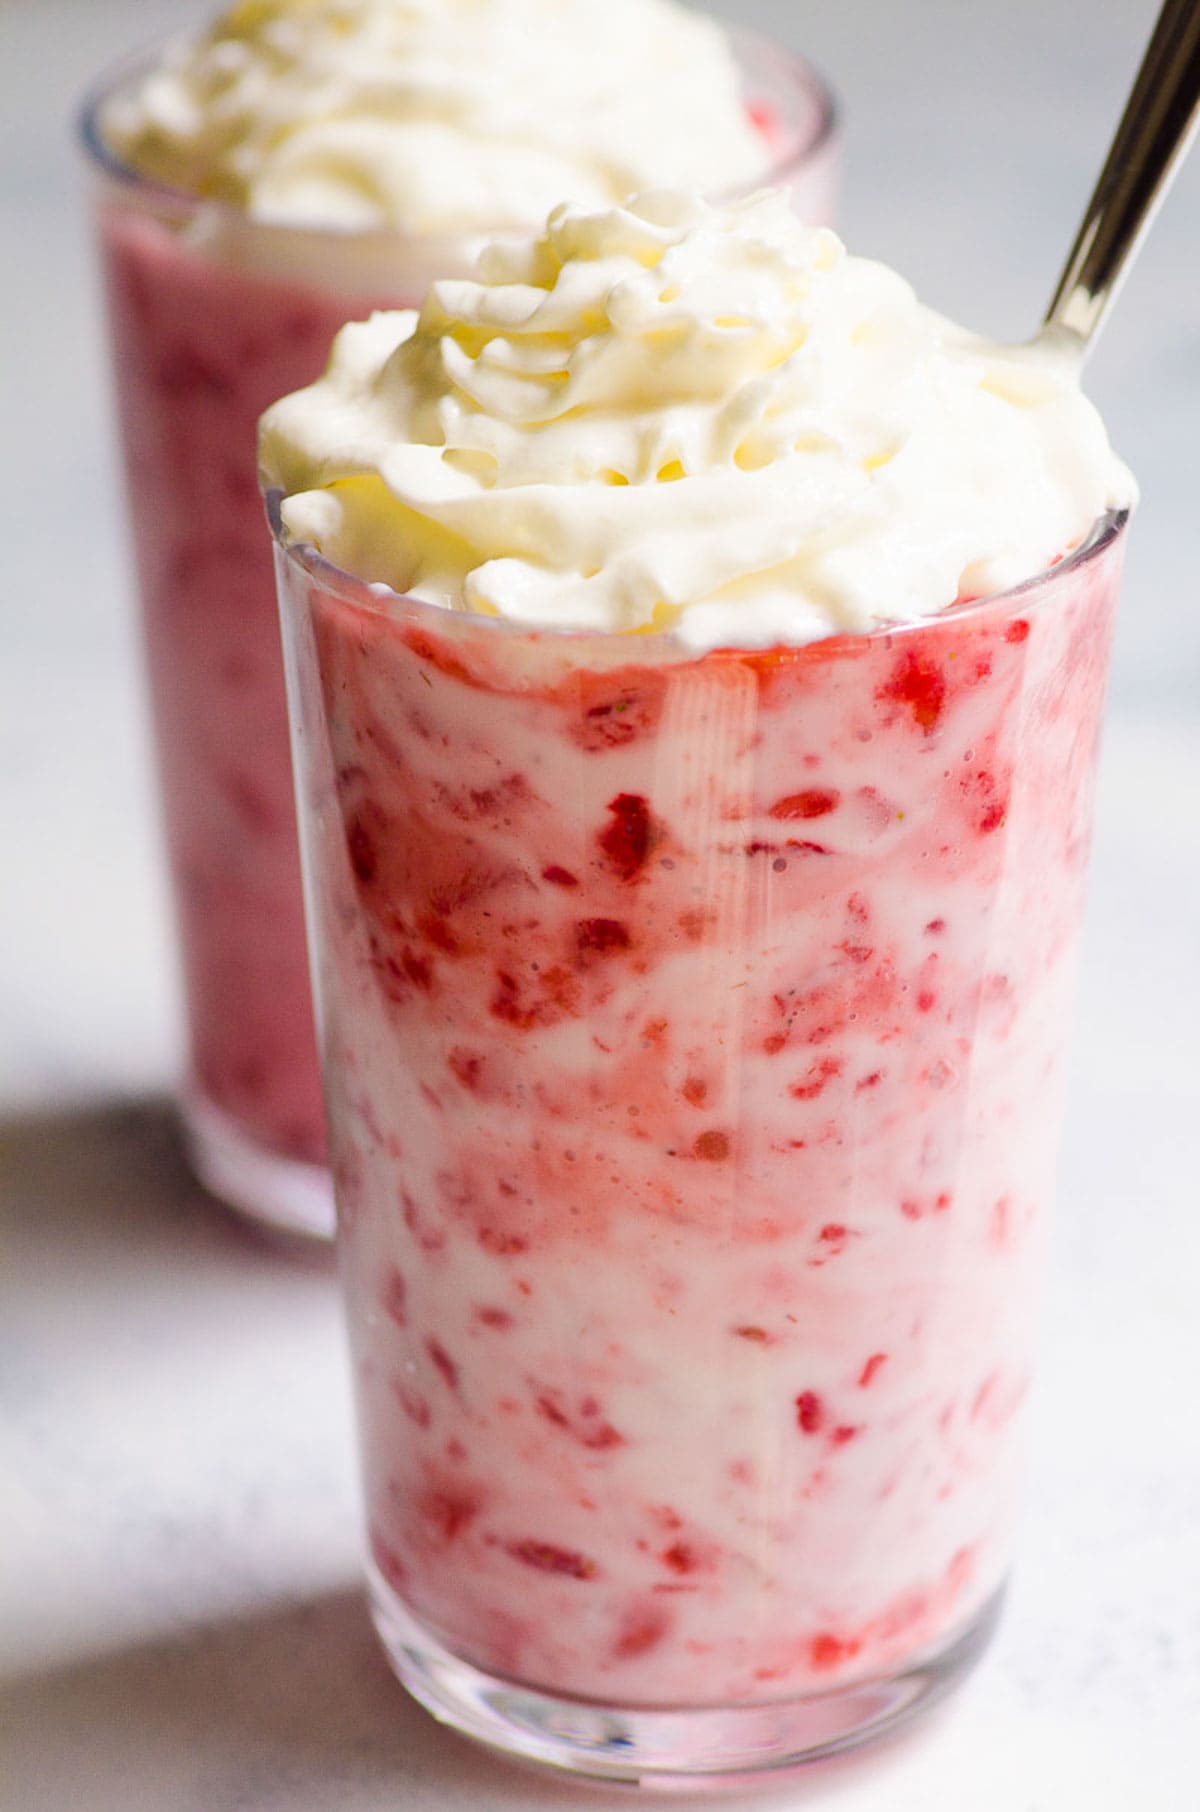 Strawberry yogurt topped with whipped cream in a glass.